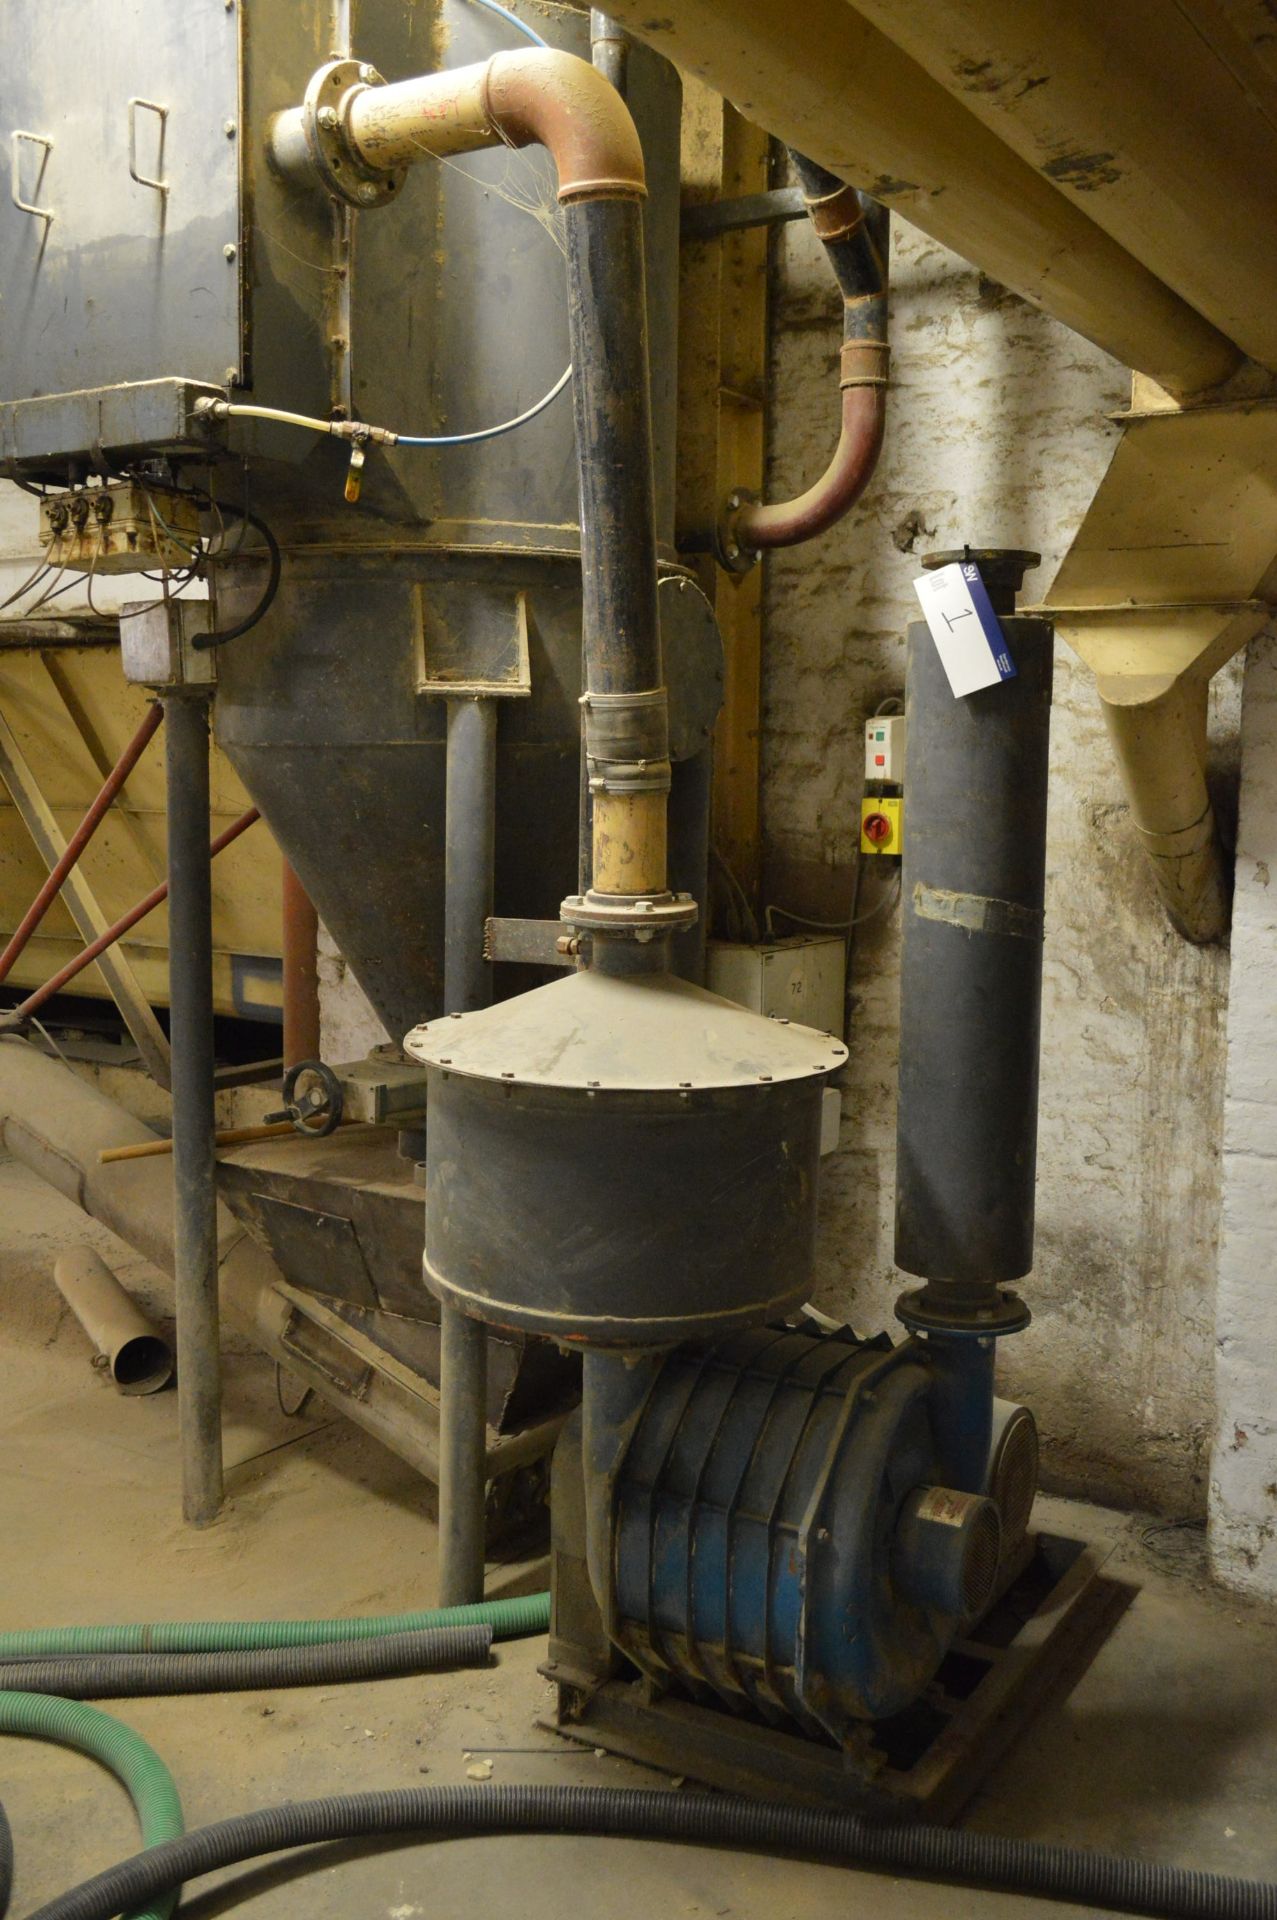 MILL CENTRAL VACUUM SYSTEM, with vacuum, filted11kW electric motor, receiver unit fitted filter,